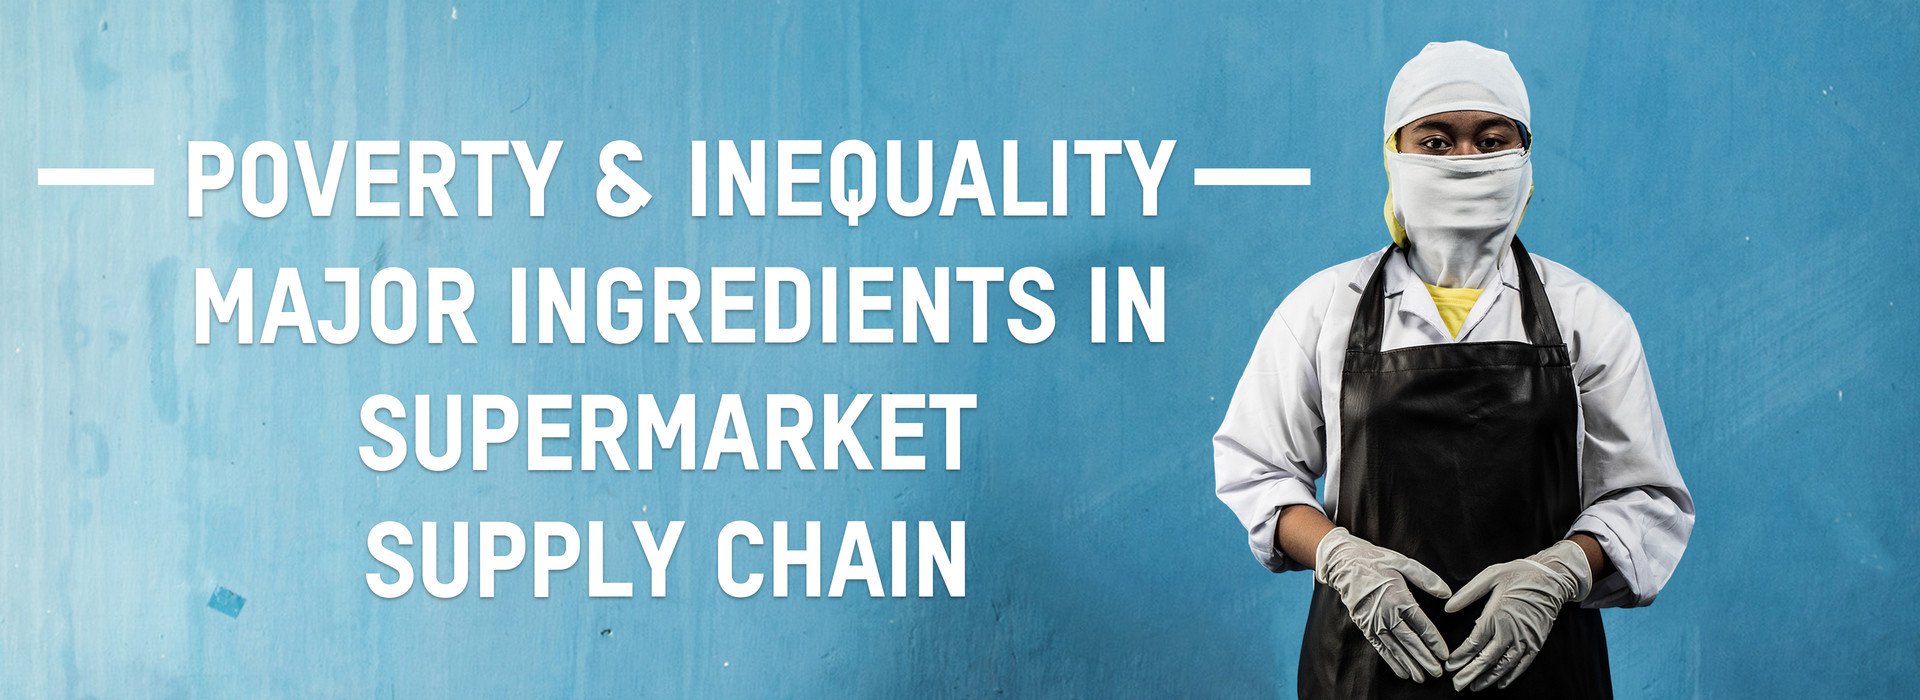 Poverty & Inequality Major ingredients in supermarket supply chain 